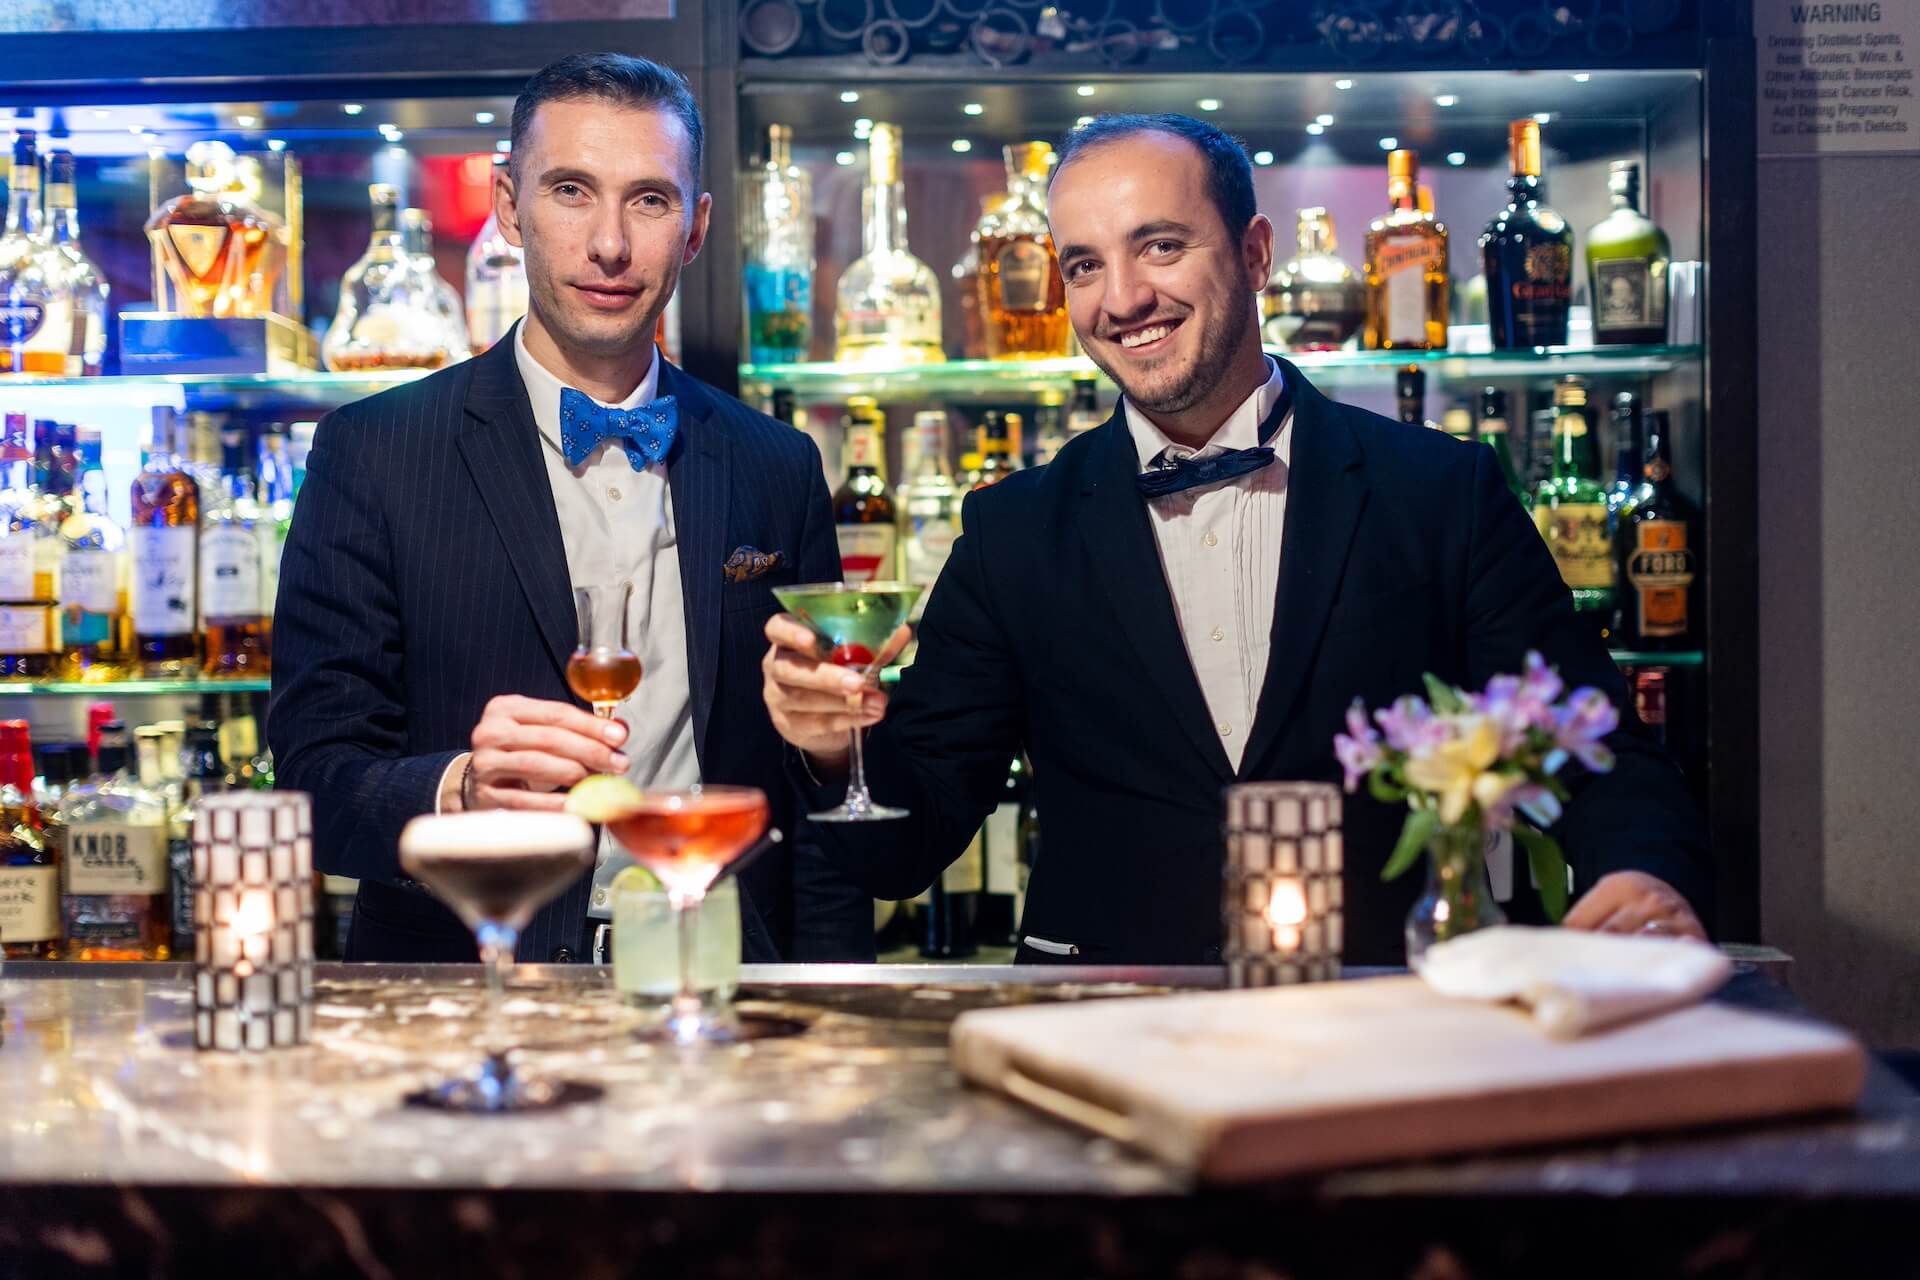 2 cater waiters serving drinks at the bar